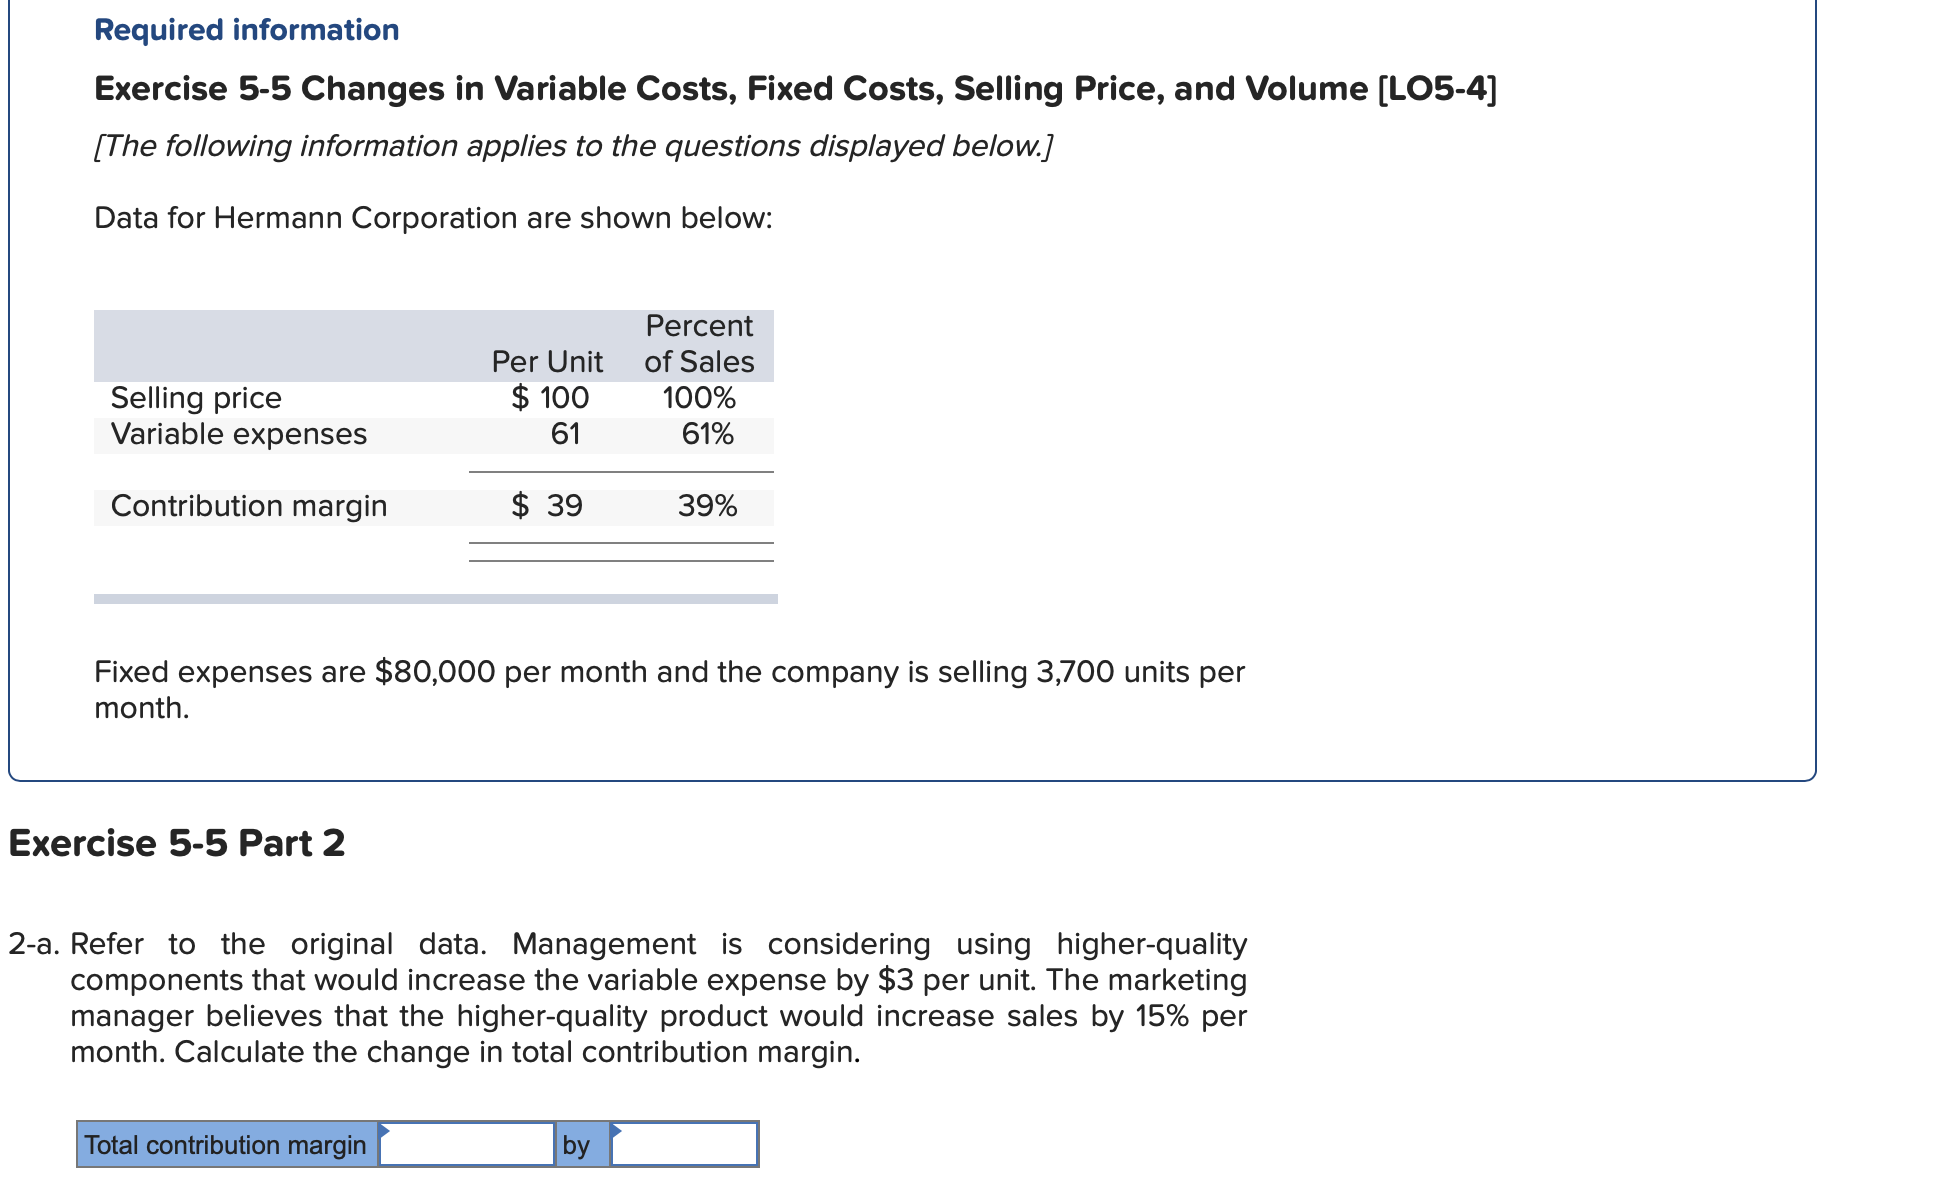 Data for Hermann Corporation are shown below:
Percent
Per Unit of Sales
$ 100
100%
Selling price
Variable expenses
61
61%
Contribution margin
$ 39
39%
Fixed expenses are $80,000 per month and the company is selling 3,700 units per
month.
Exercise 5-5 Part 2
2-a. Refer to the original data. Management is considering using higher-quality
components that would increase the variable expense by $3 per unit. The marketing
manager believes that the higher-quality product would increase sales by 15% per
month. Calculate the change in total contribution margin.
Total contribution margin
by
